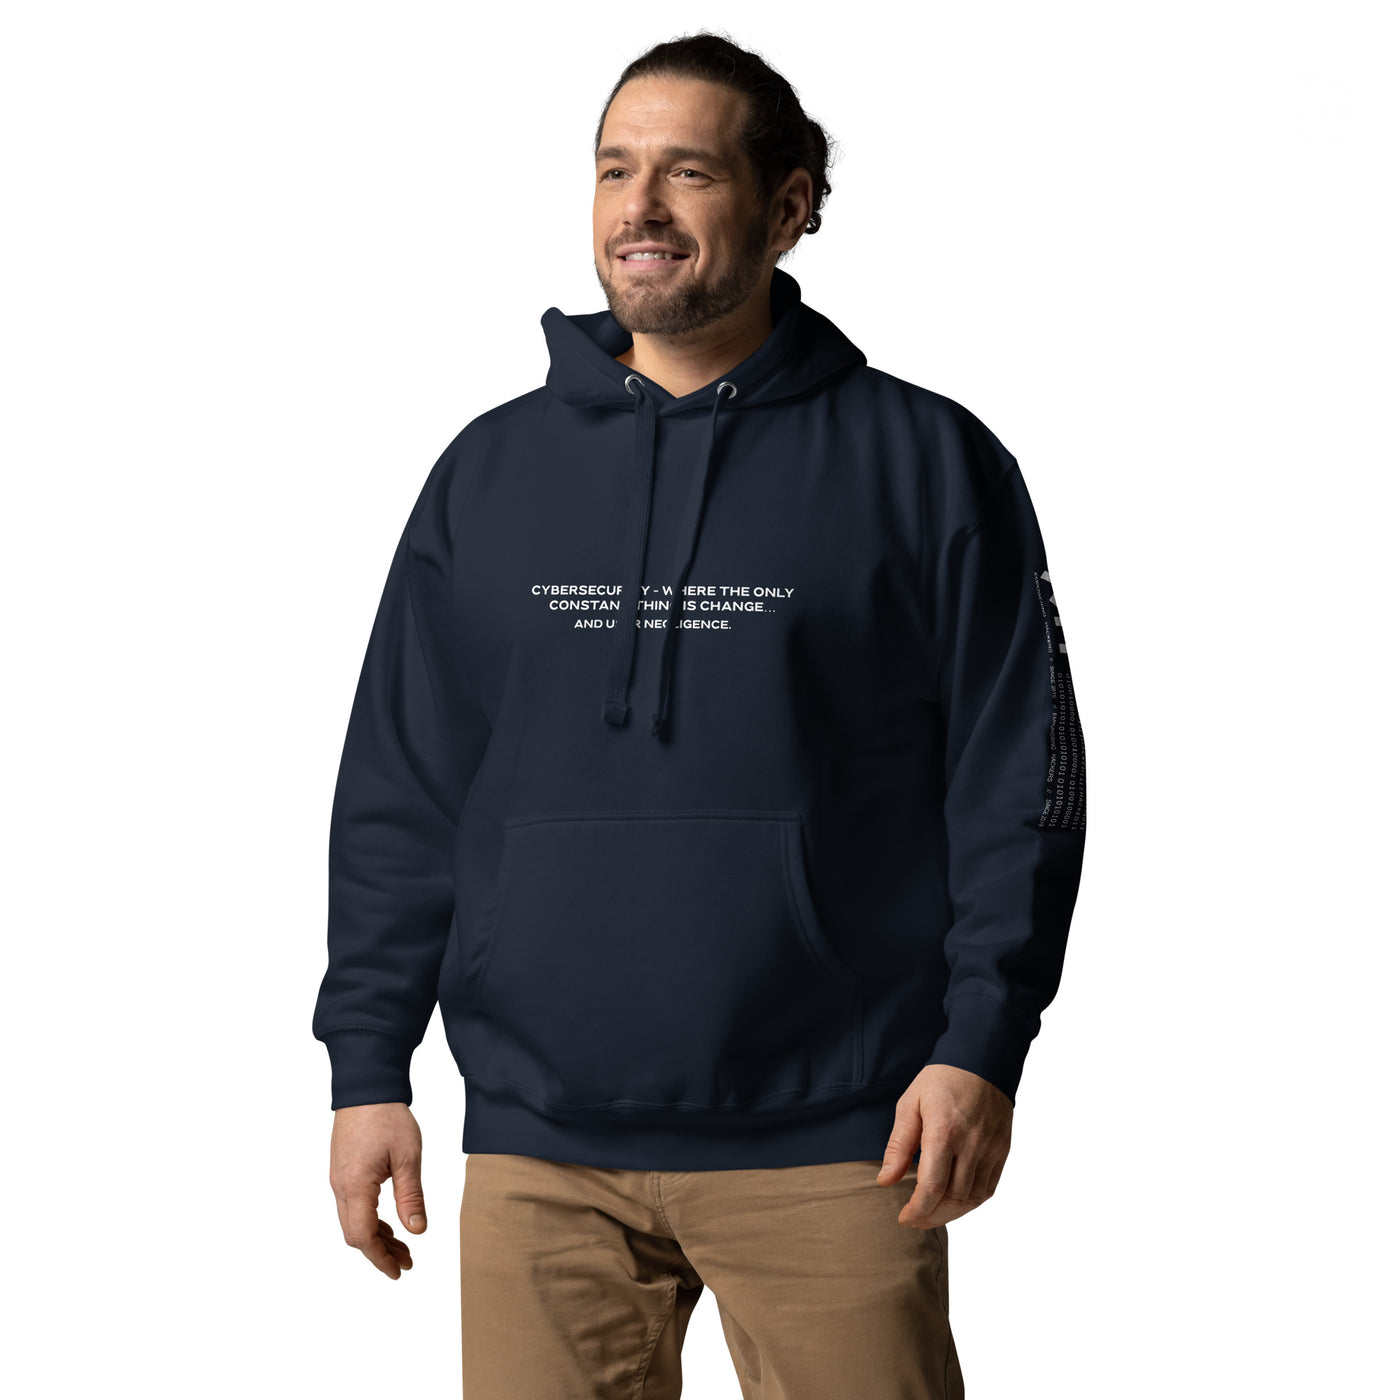 Cybersecurity where the only constant thing is change and user negligence V2 - Unisex Hoodie